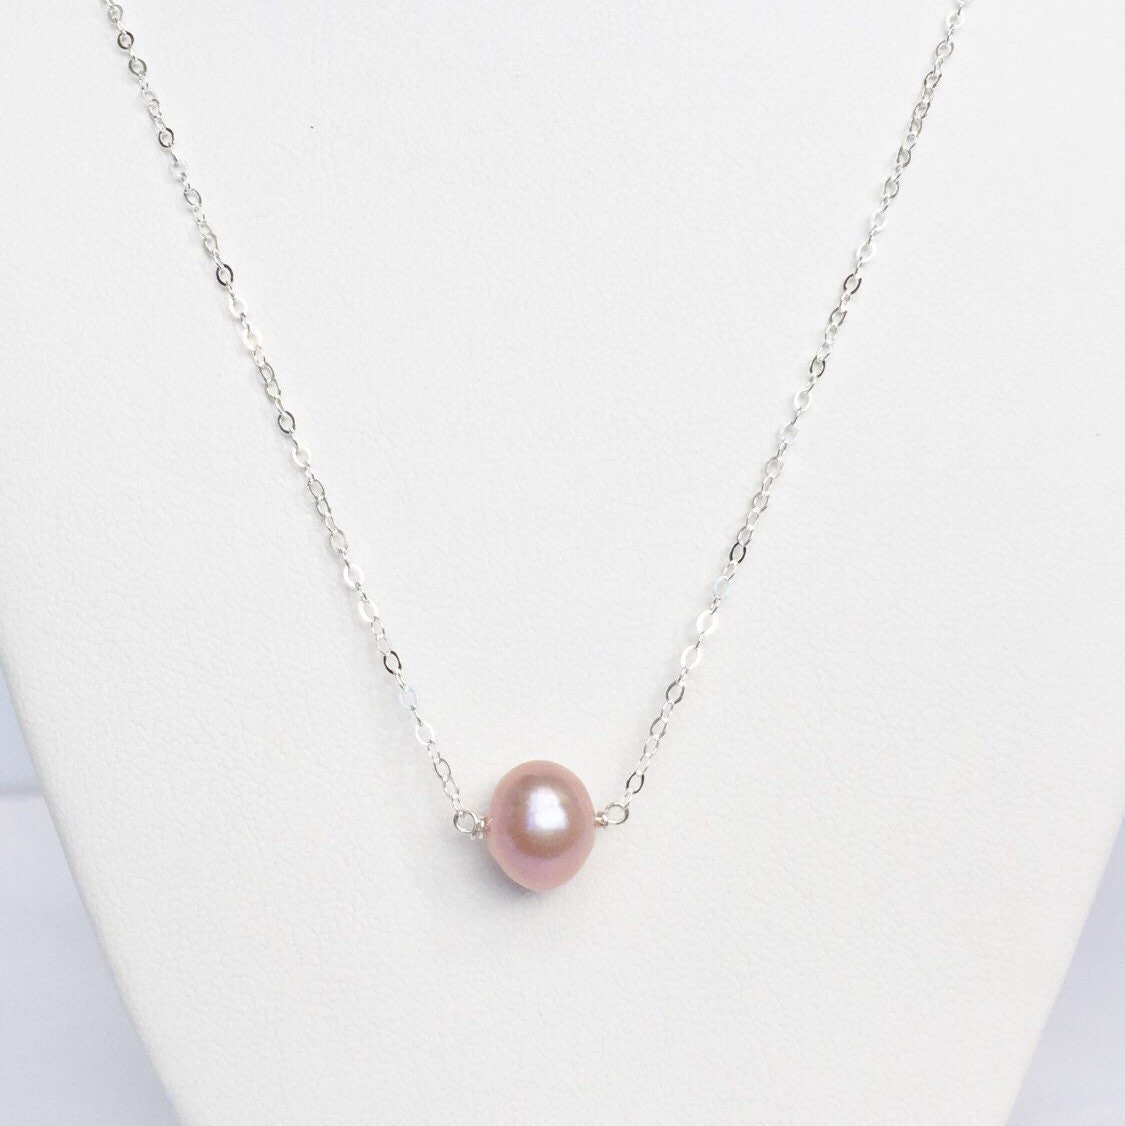 Simple Pearl Solitaire Necklace, June Birthstone Necklace in Gold or Silver